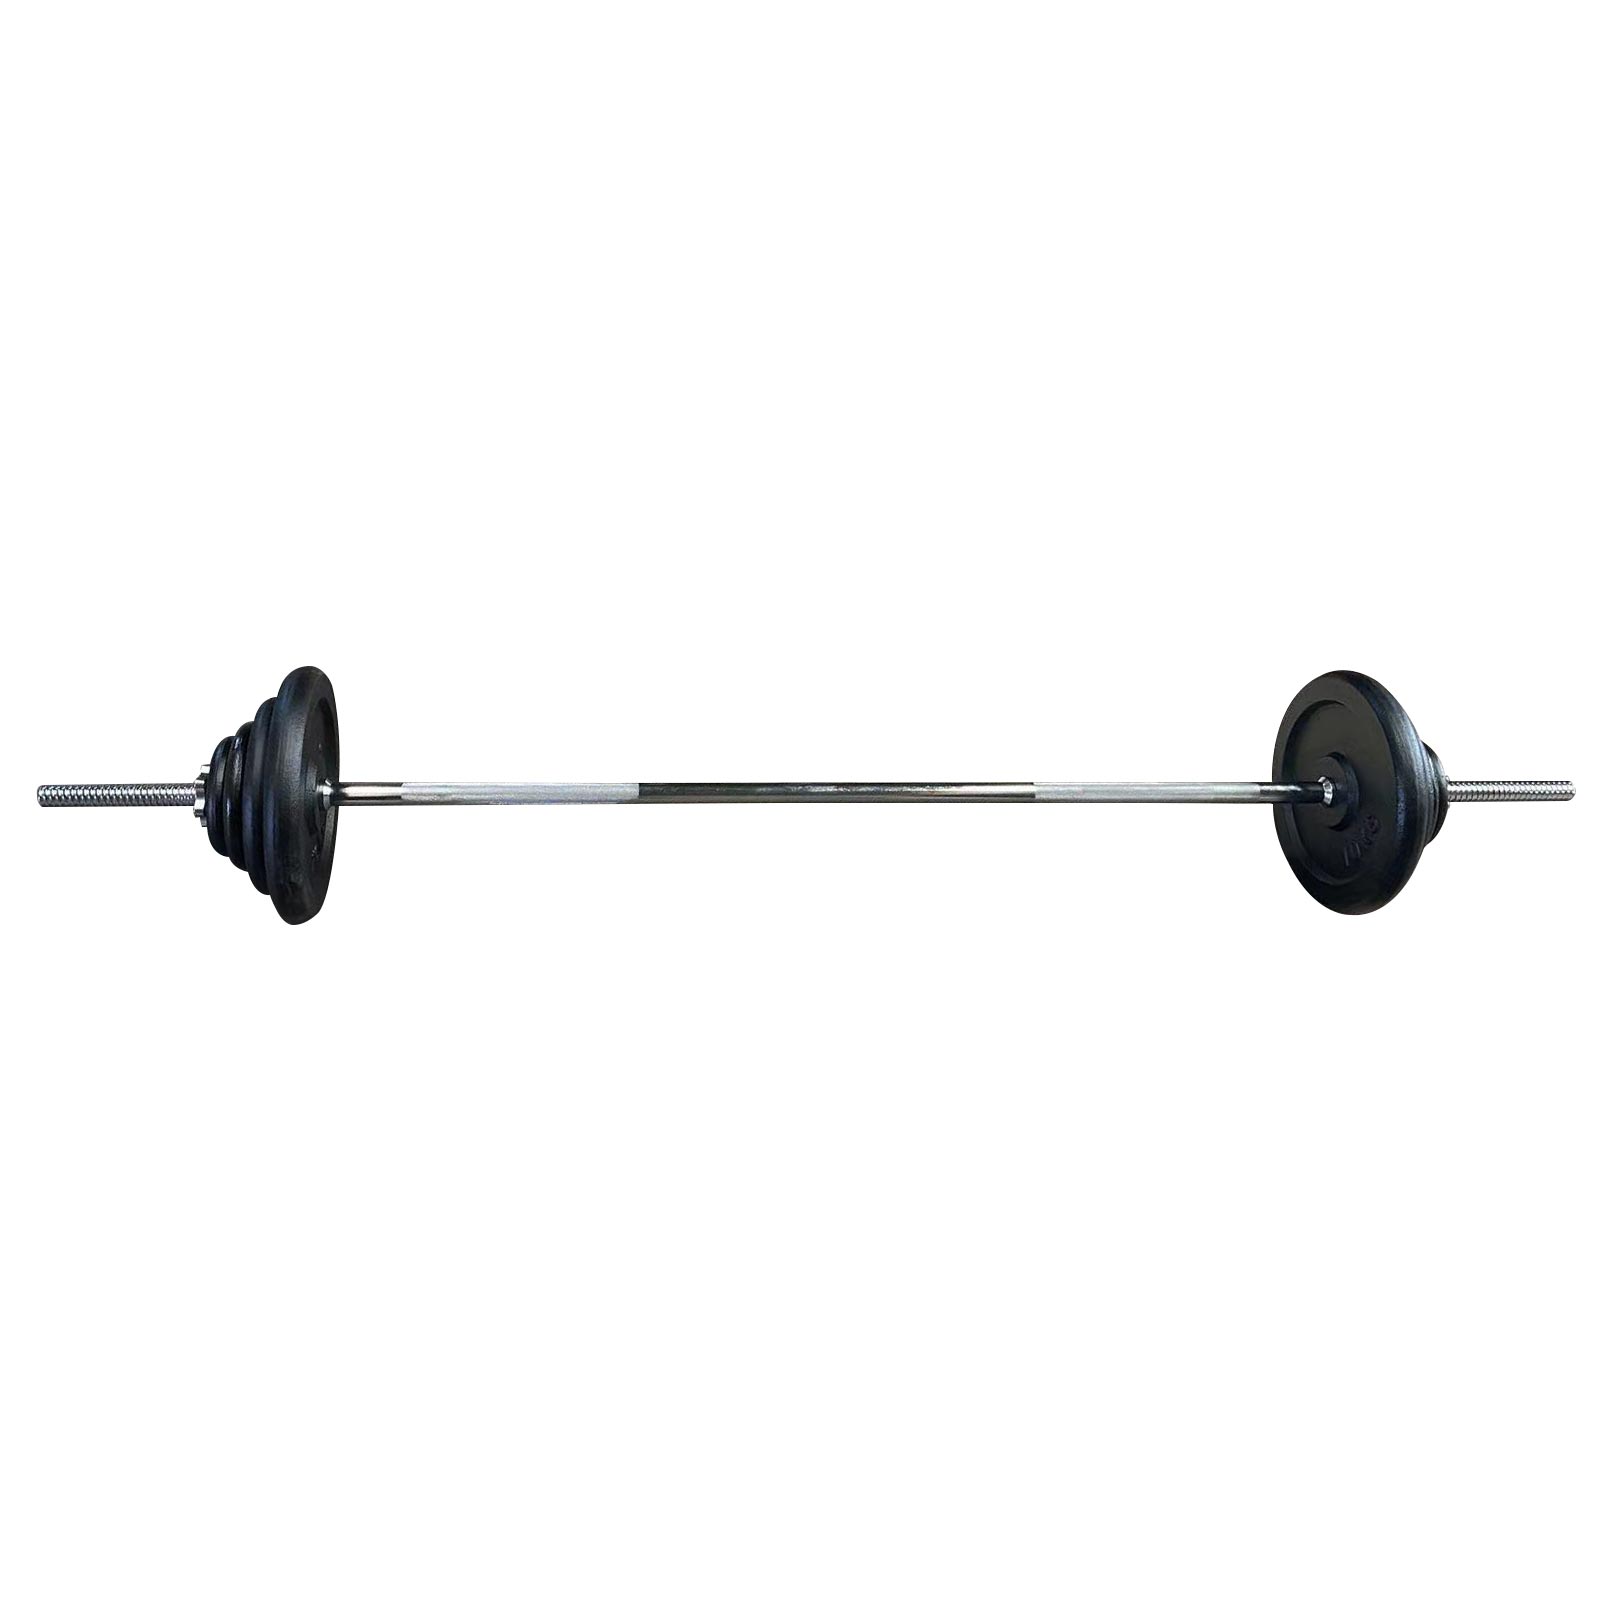 RIVAL CAST IRON BARBELL SET - 80KG